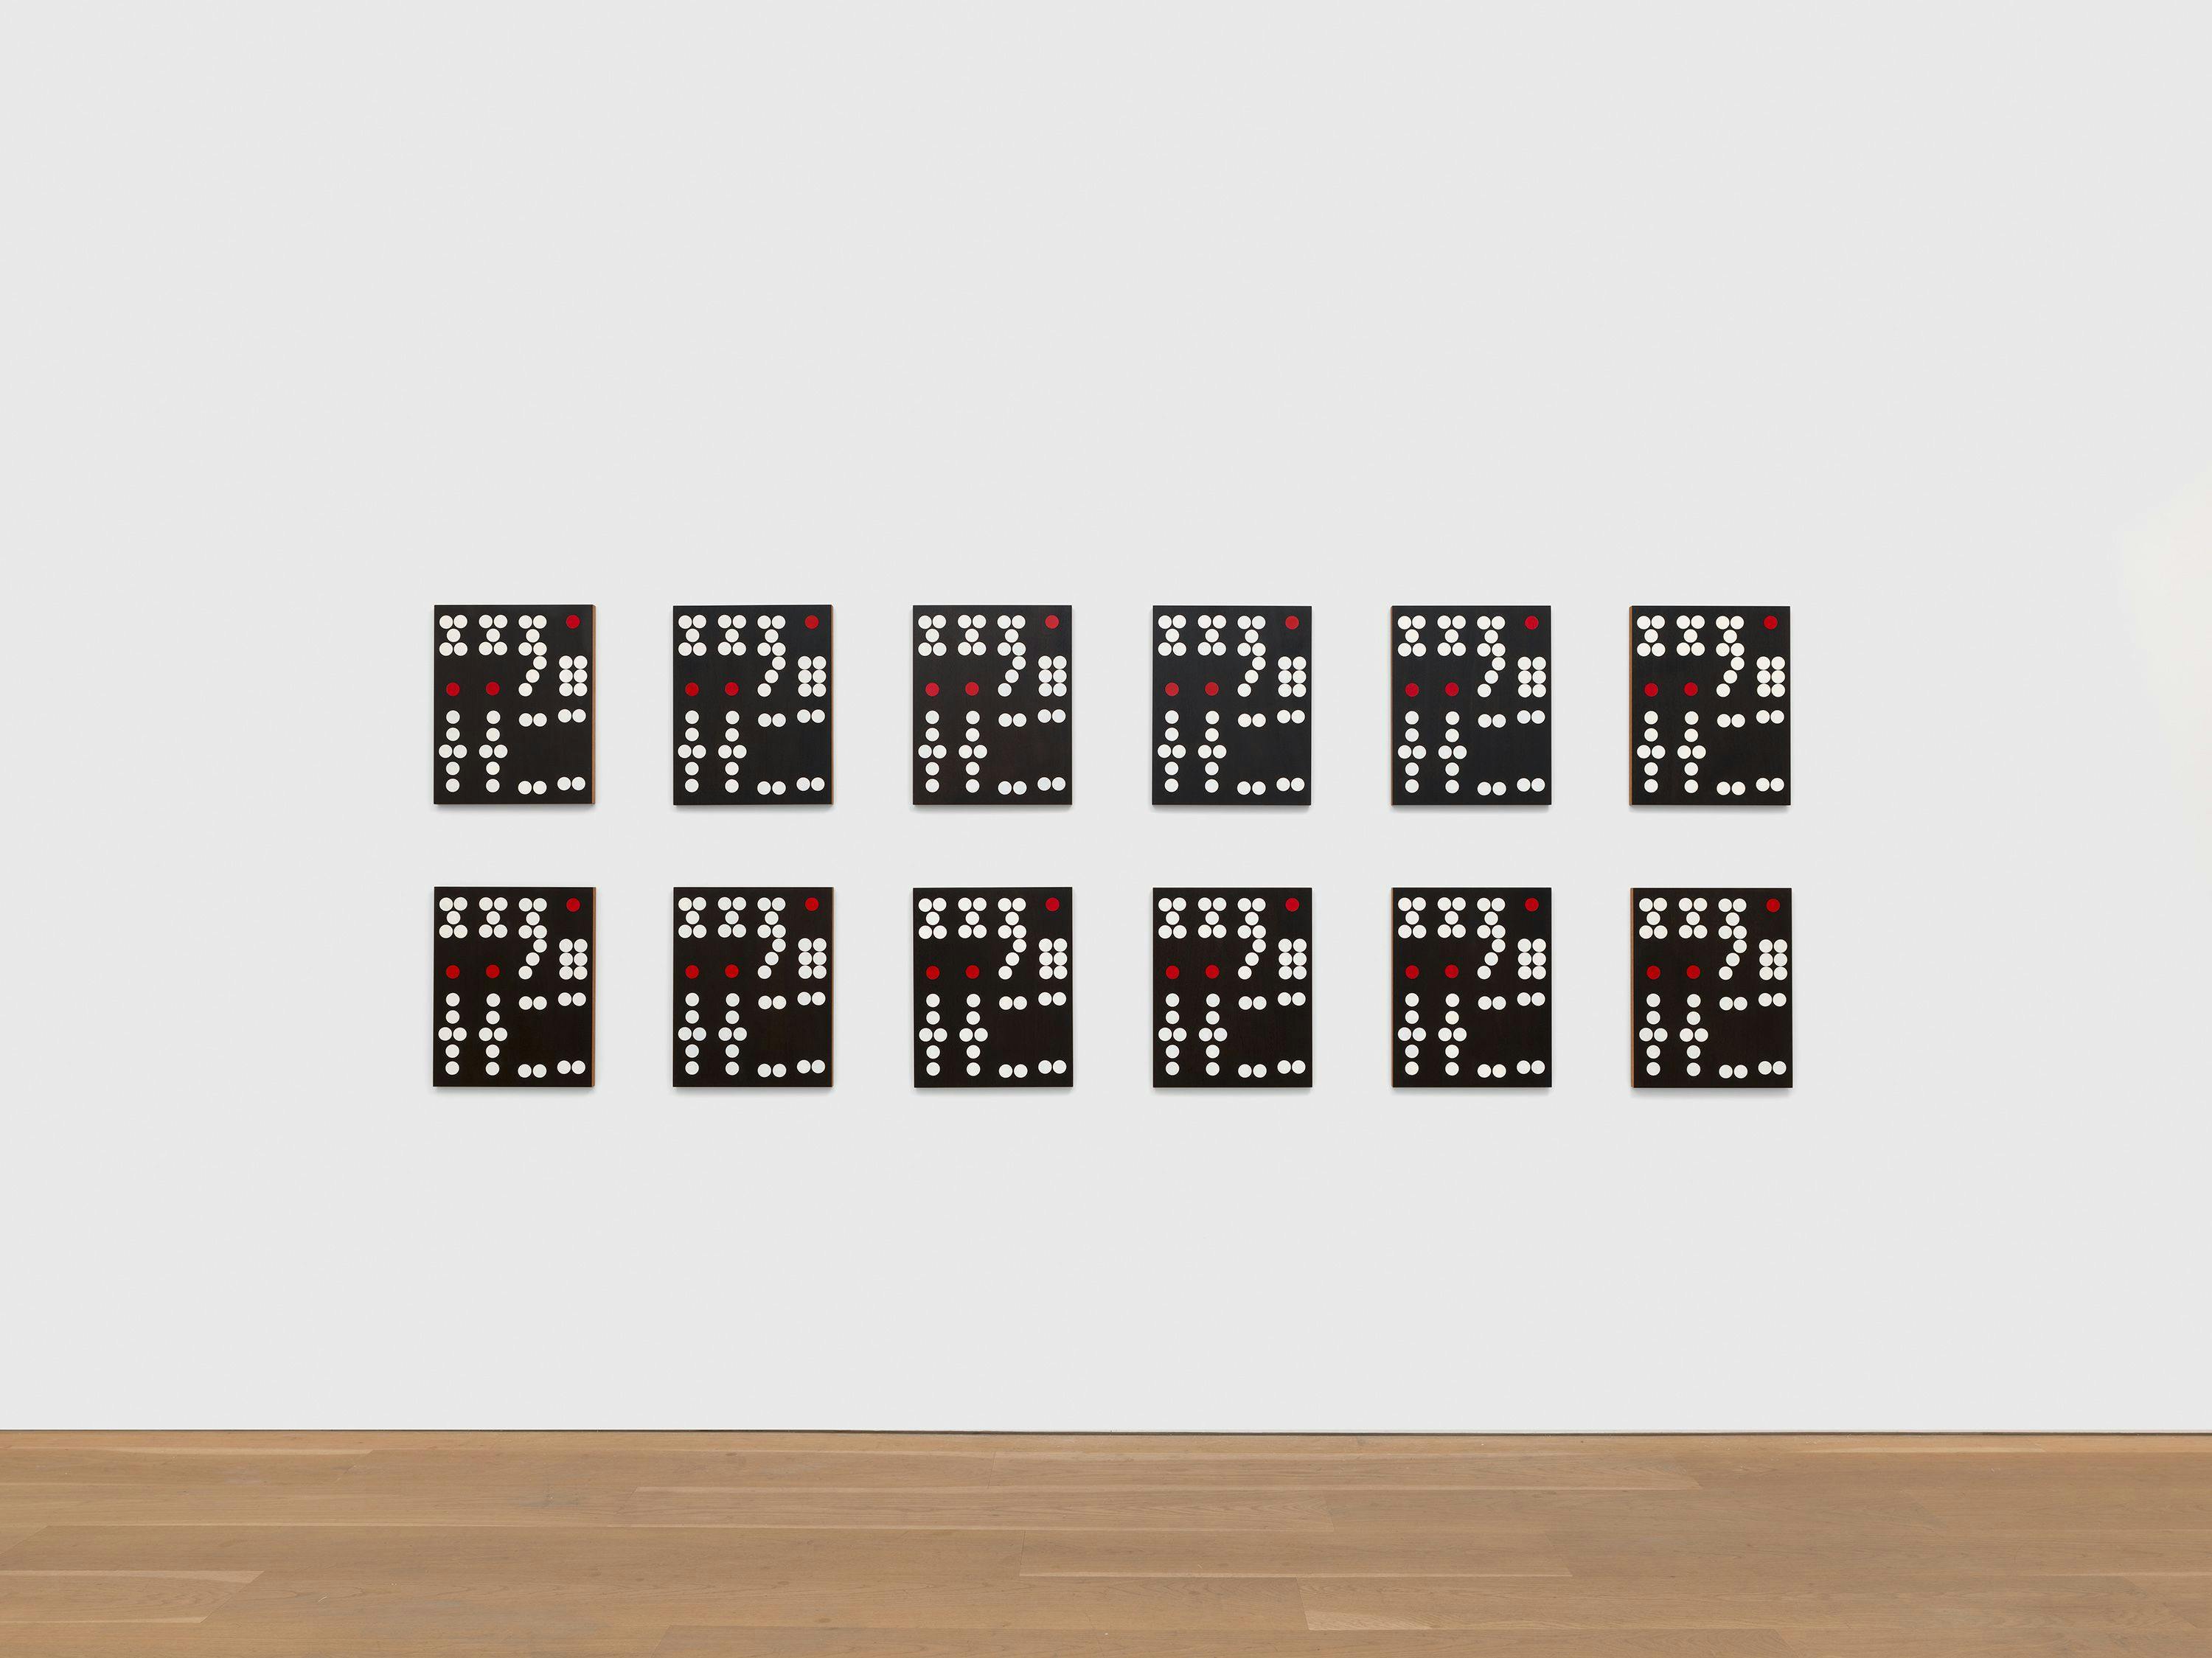 A painting by Sherrie Levine, titled Hong Kong Dominoes: 1-12, dated 2017.